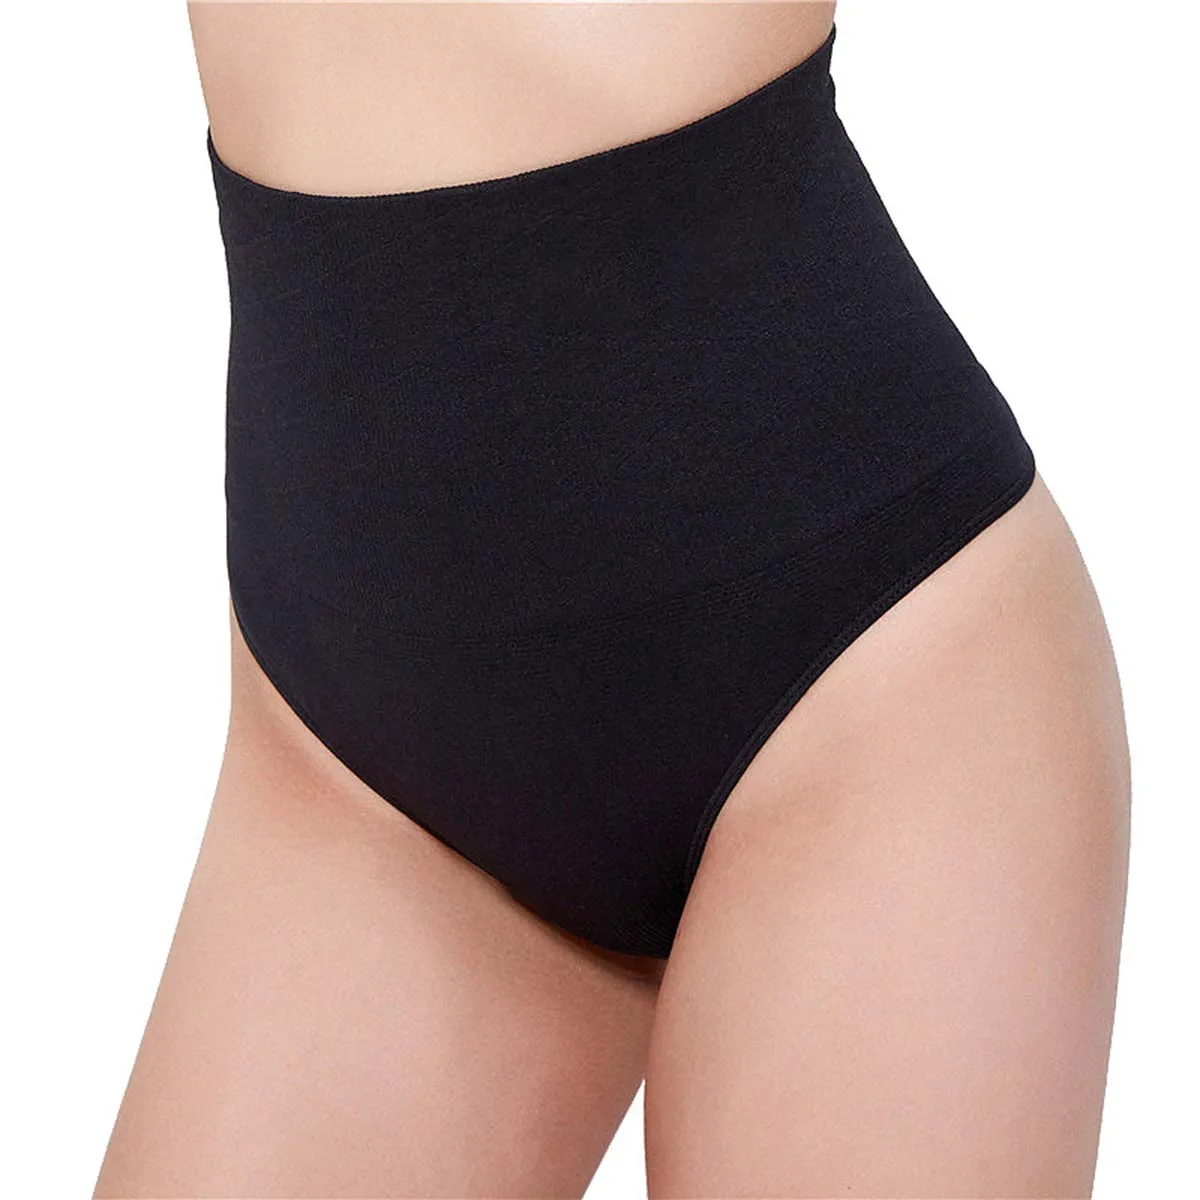 Pack Womens Basic Every Day High Waist Shapewear Trainer Tummy Control  Thong Panties Underwear Body Shaper Underwear From Seamless, $16.24